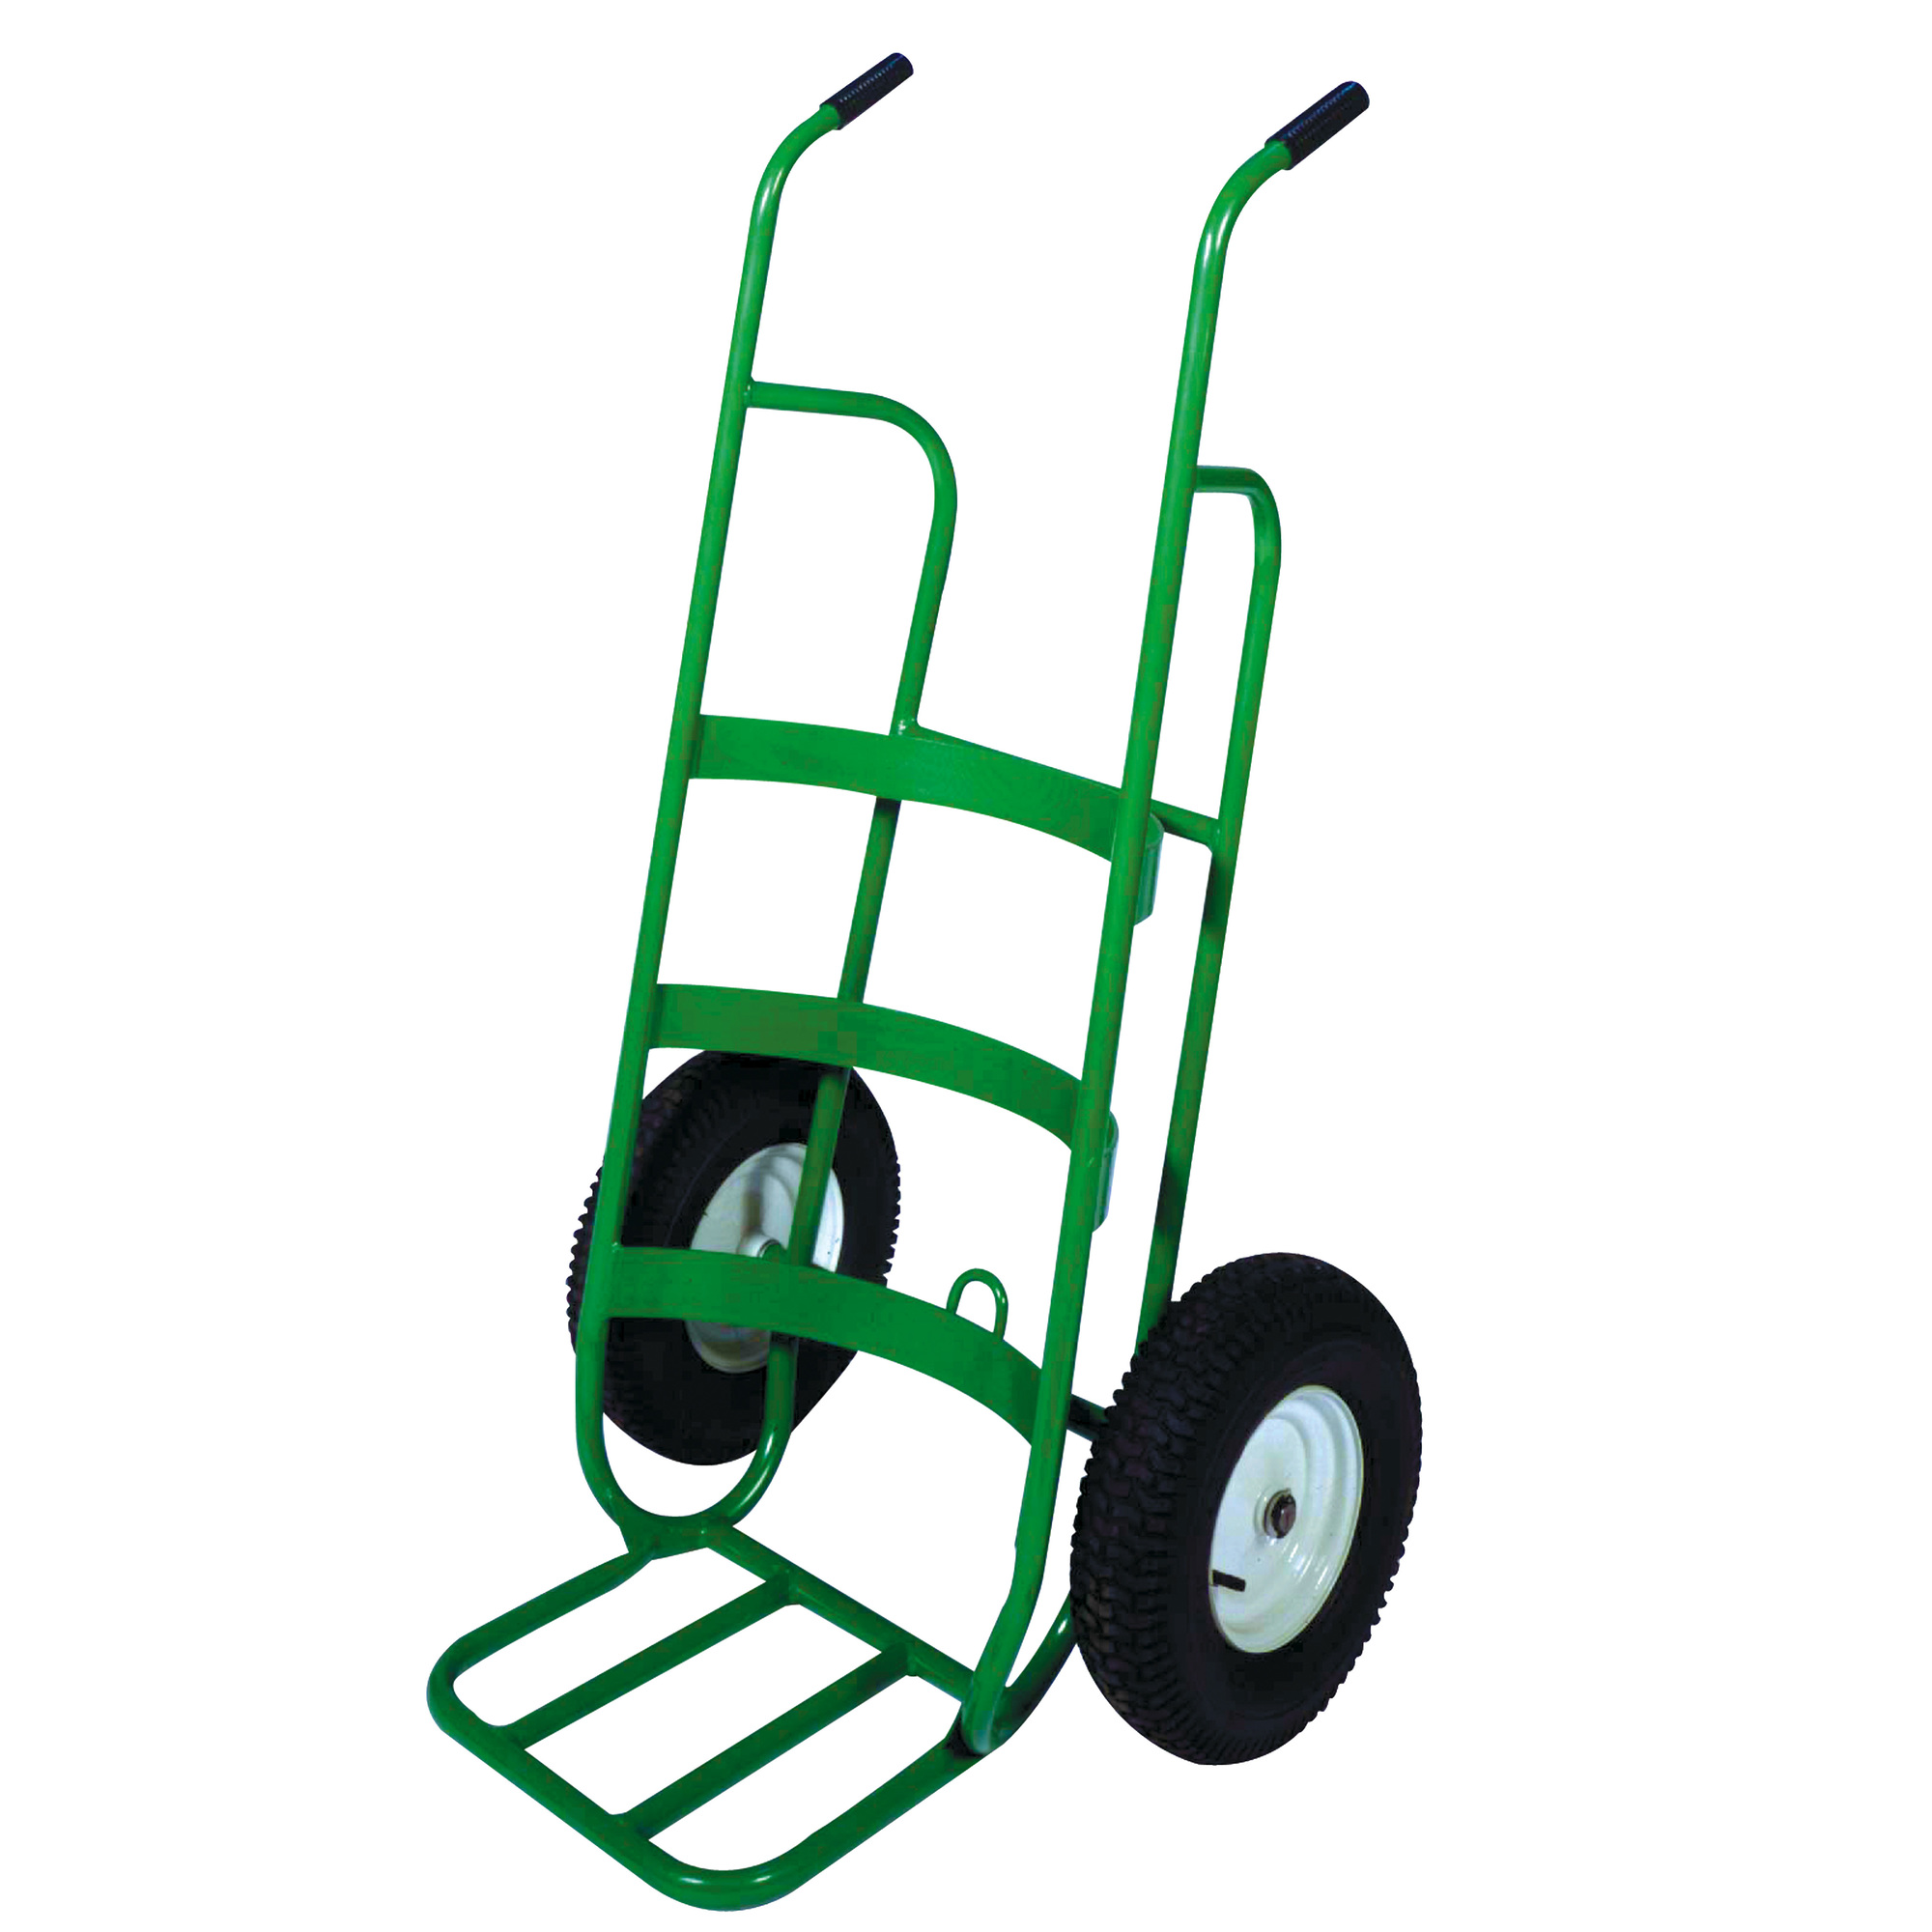 Valley Craft, Nursery Hand Truck, Load Capacity 1500 lb, Height 64 in, Material Steel, Model F86083A4